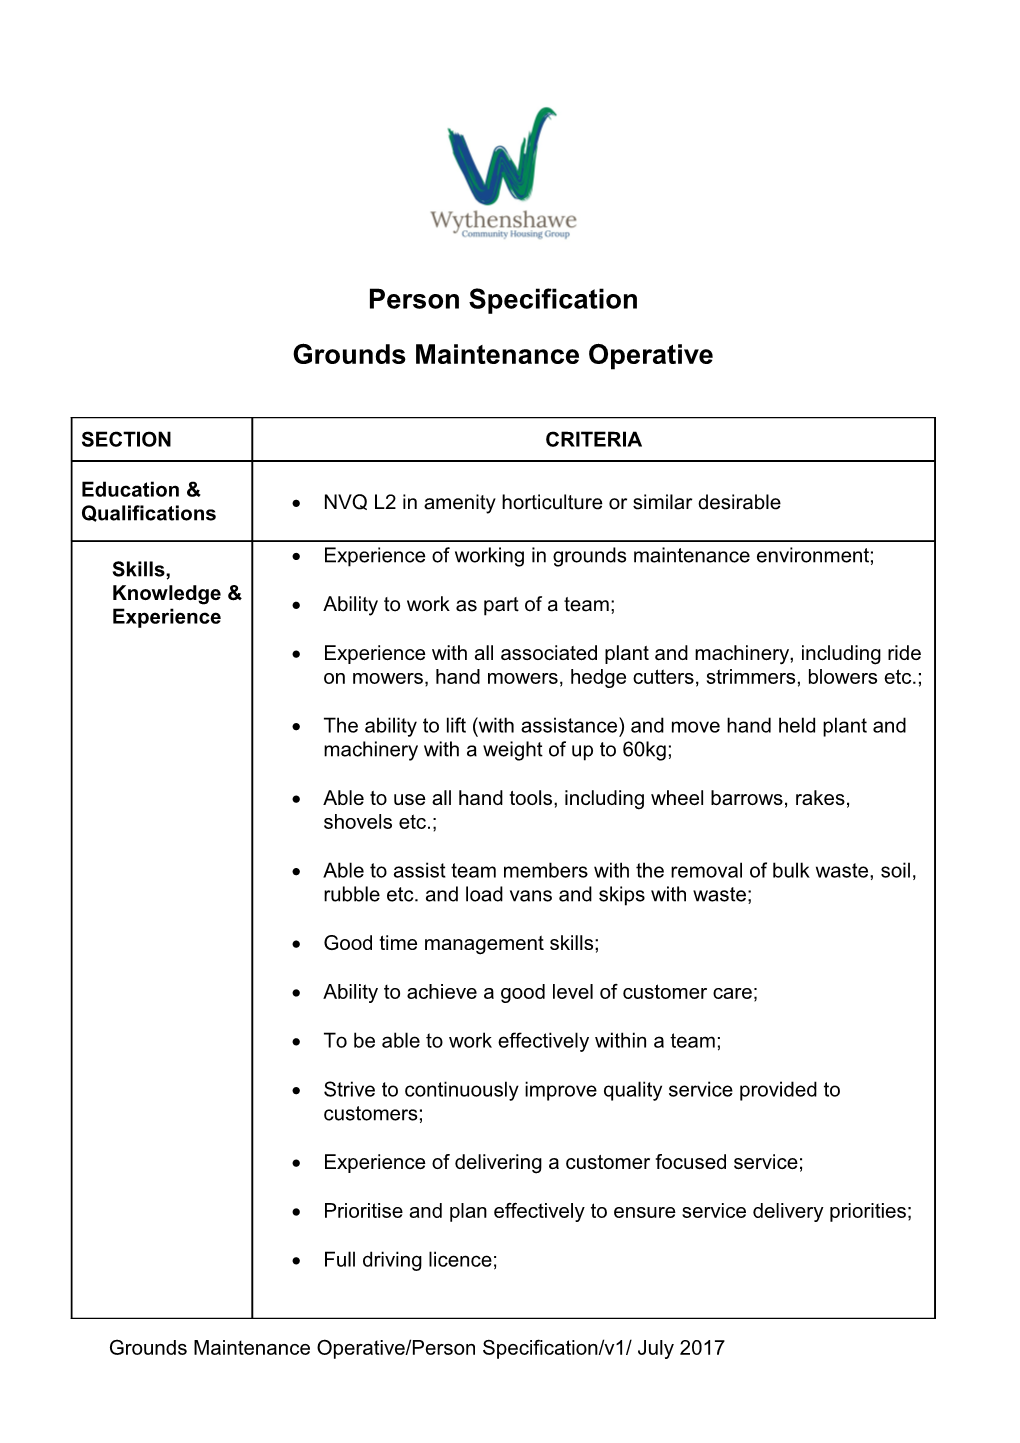 Person Specification s42